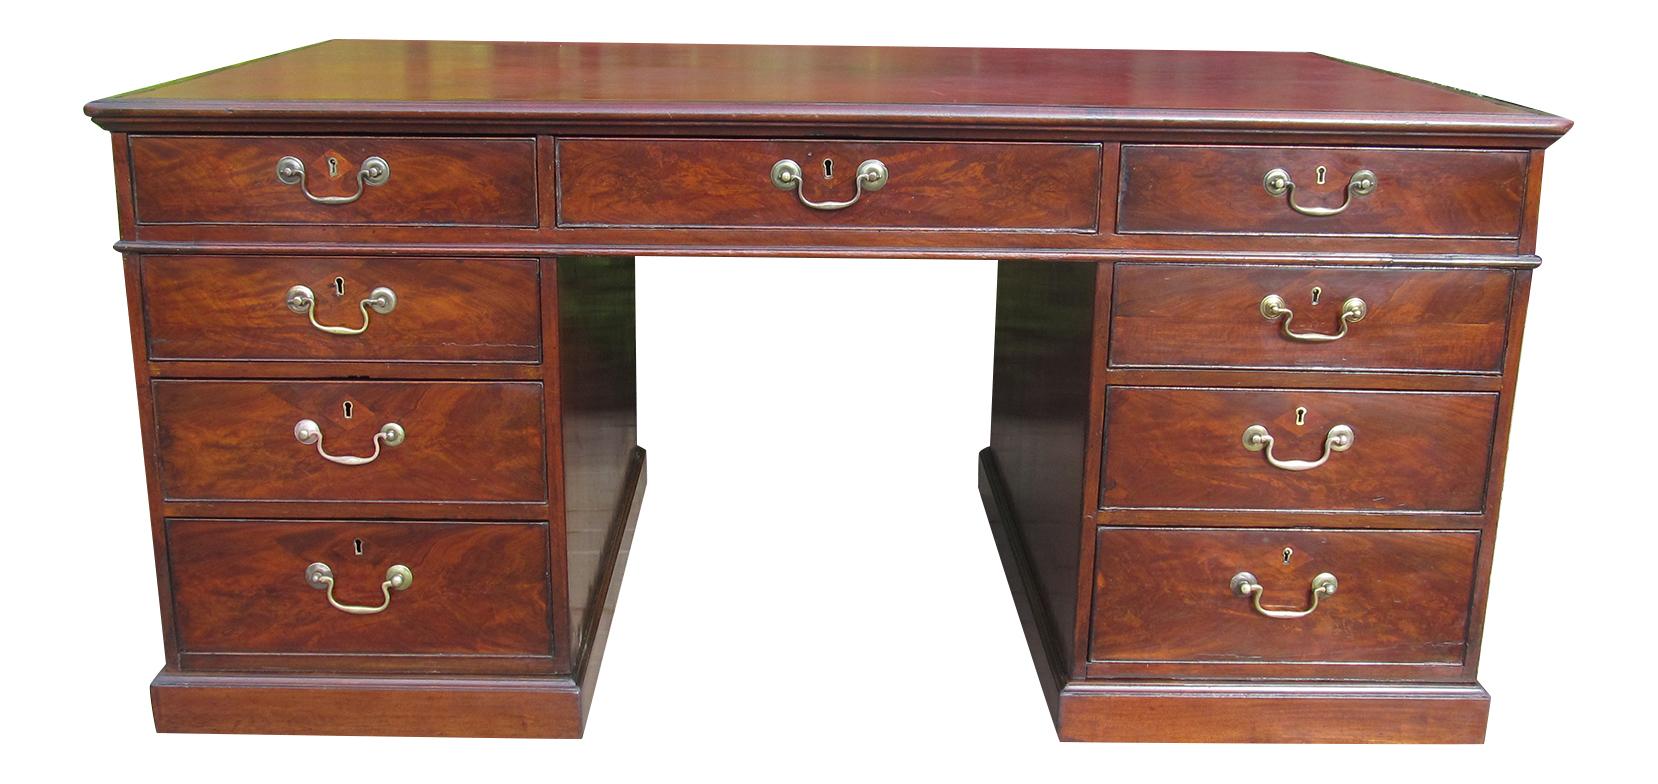 English Chippendale 18th Century Mahogany Library Partner's Desk with Red Leather Top For Sale